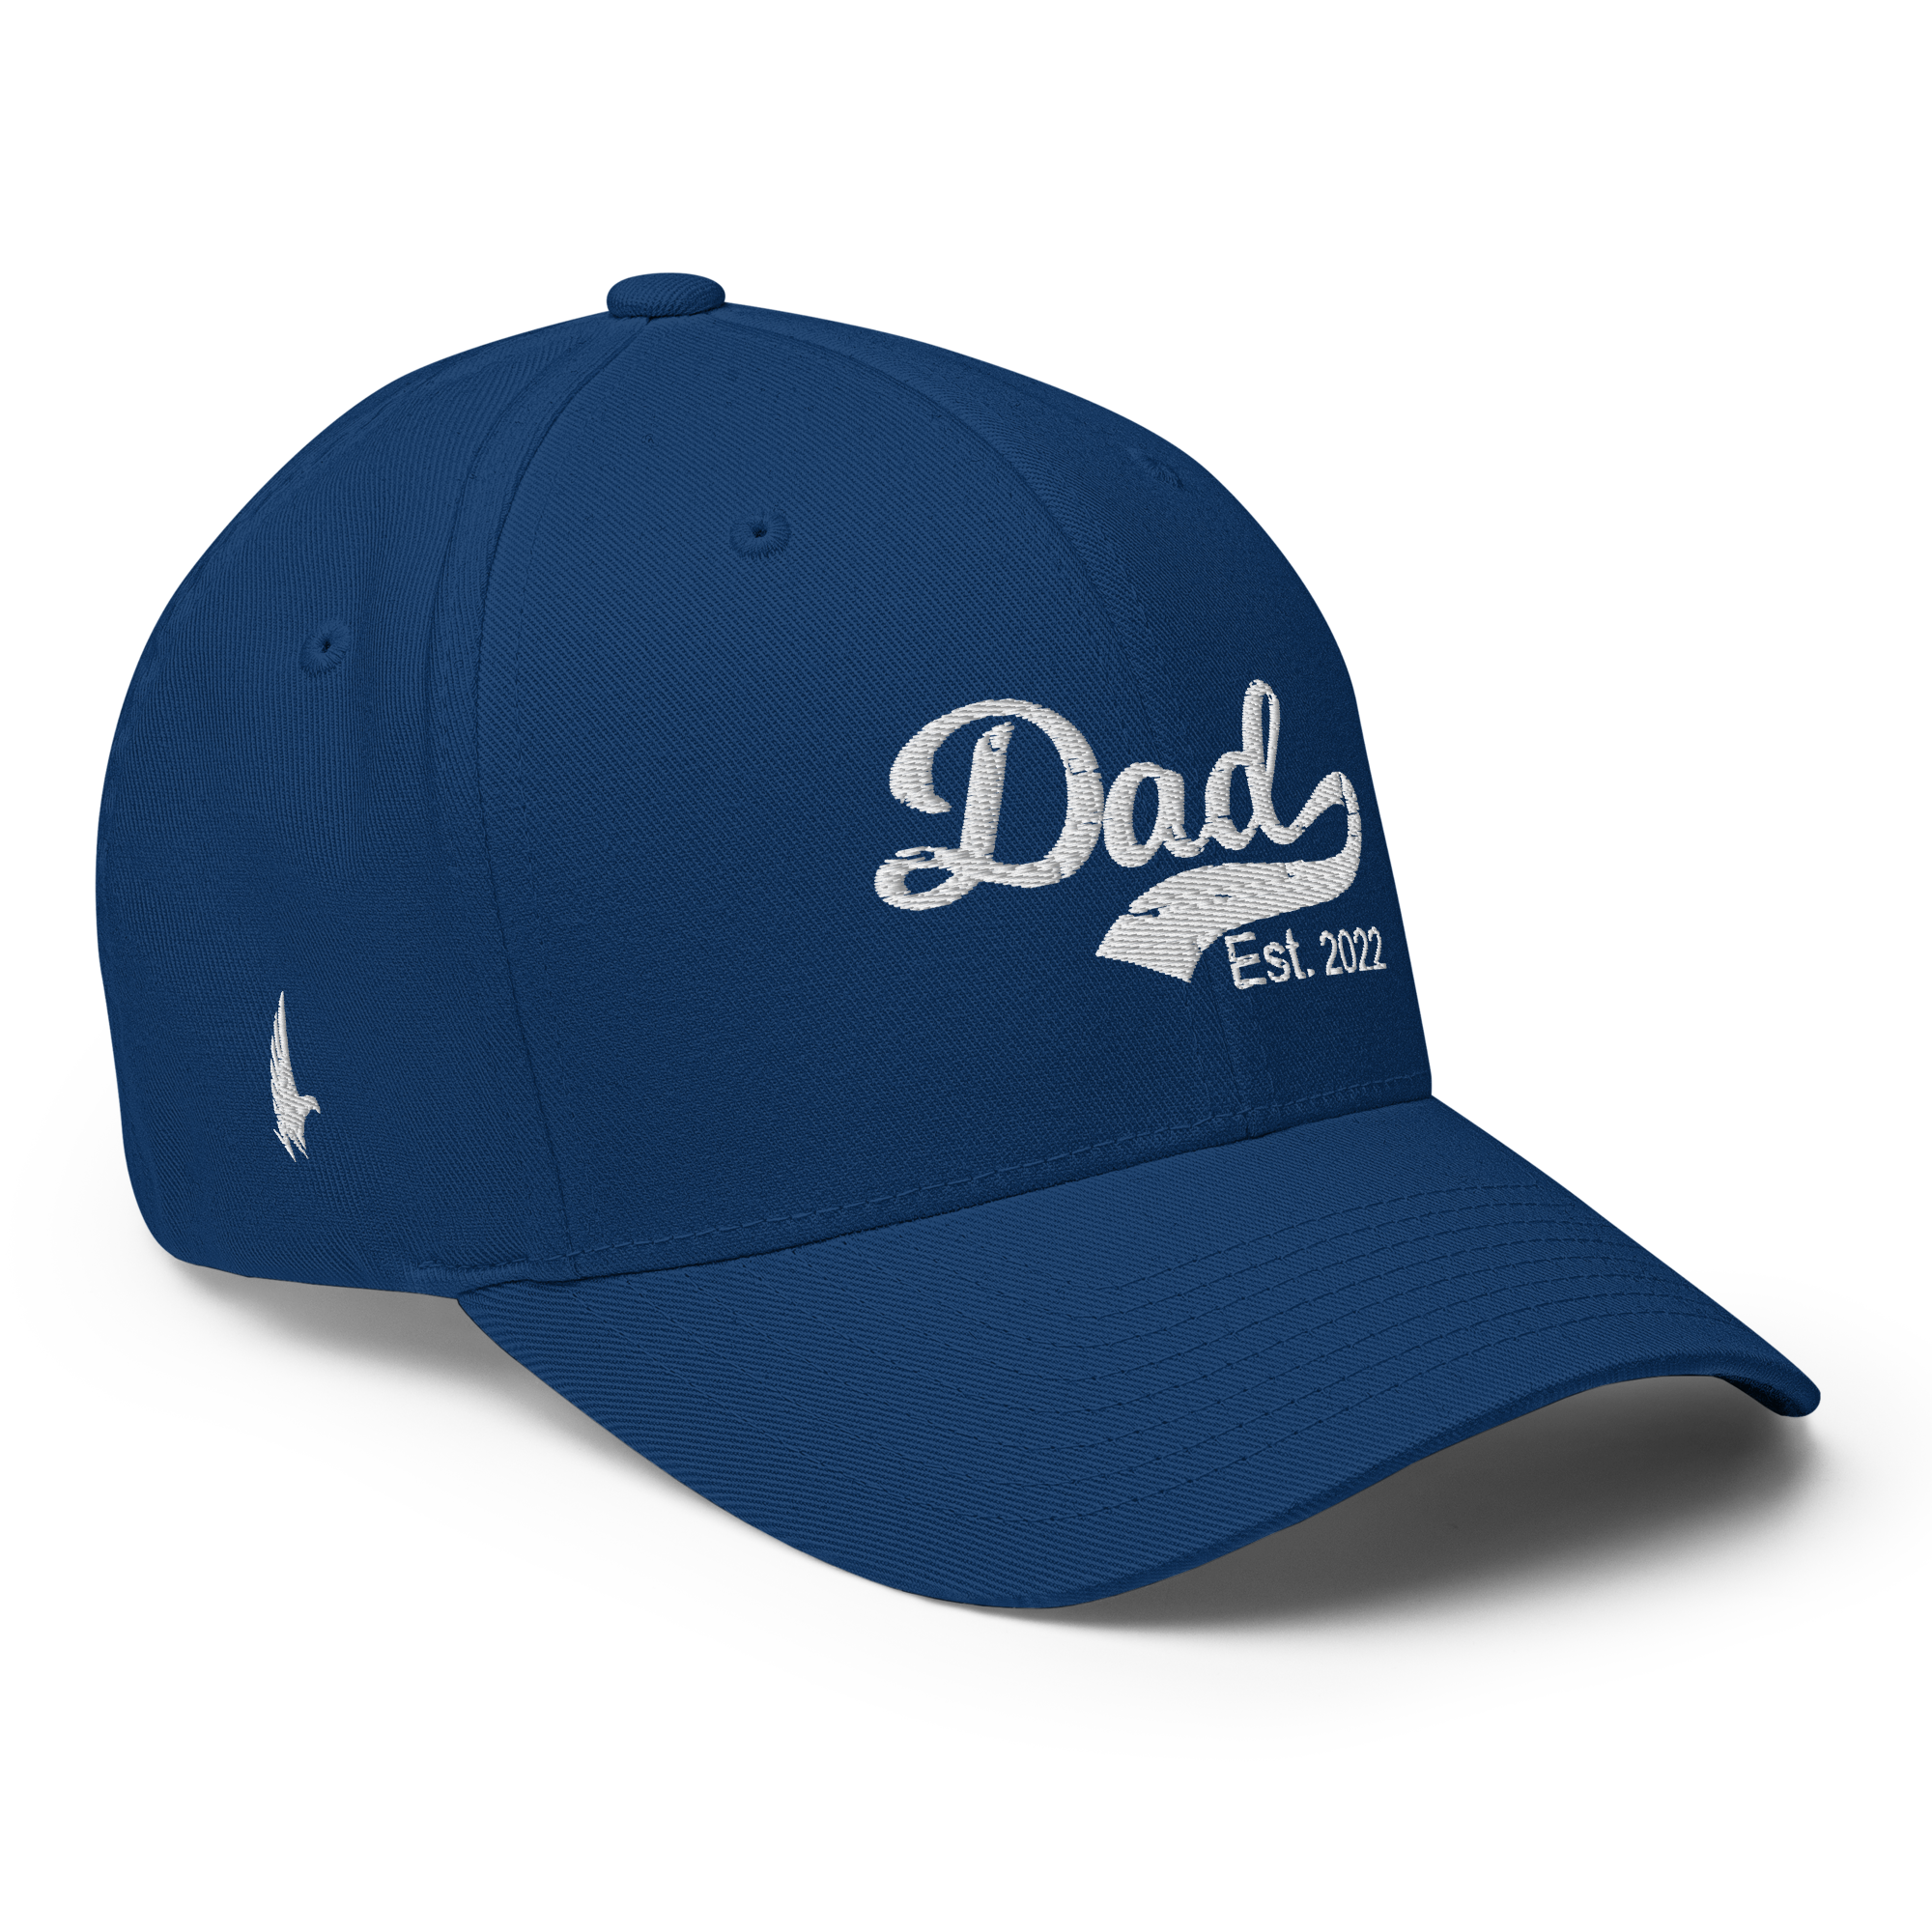 Dad Est 2022 Fitted Hat Blue - Loyalty Vibes